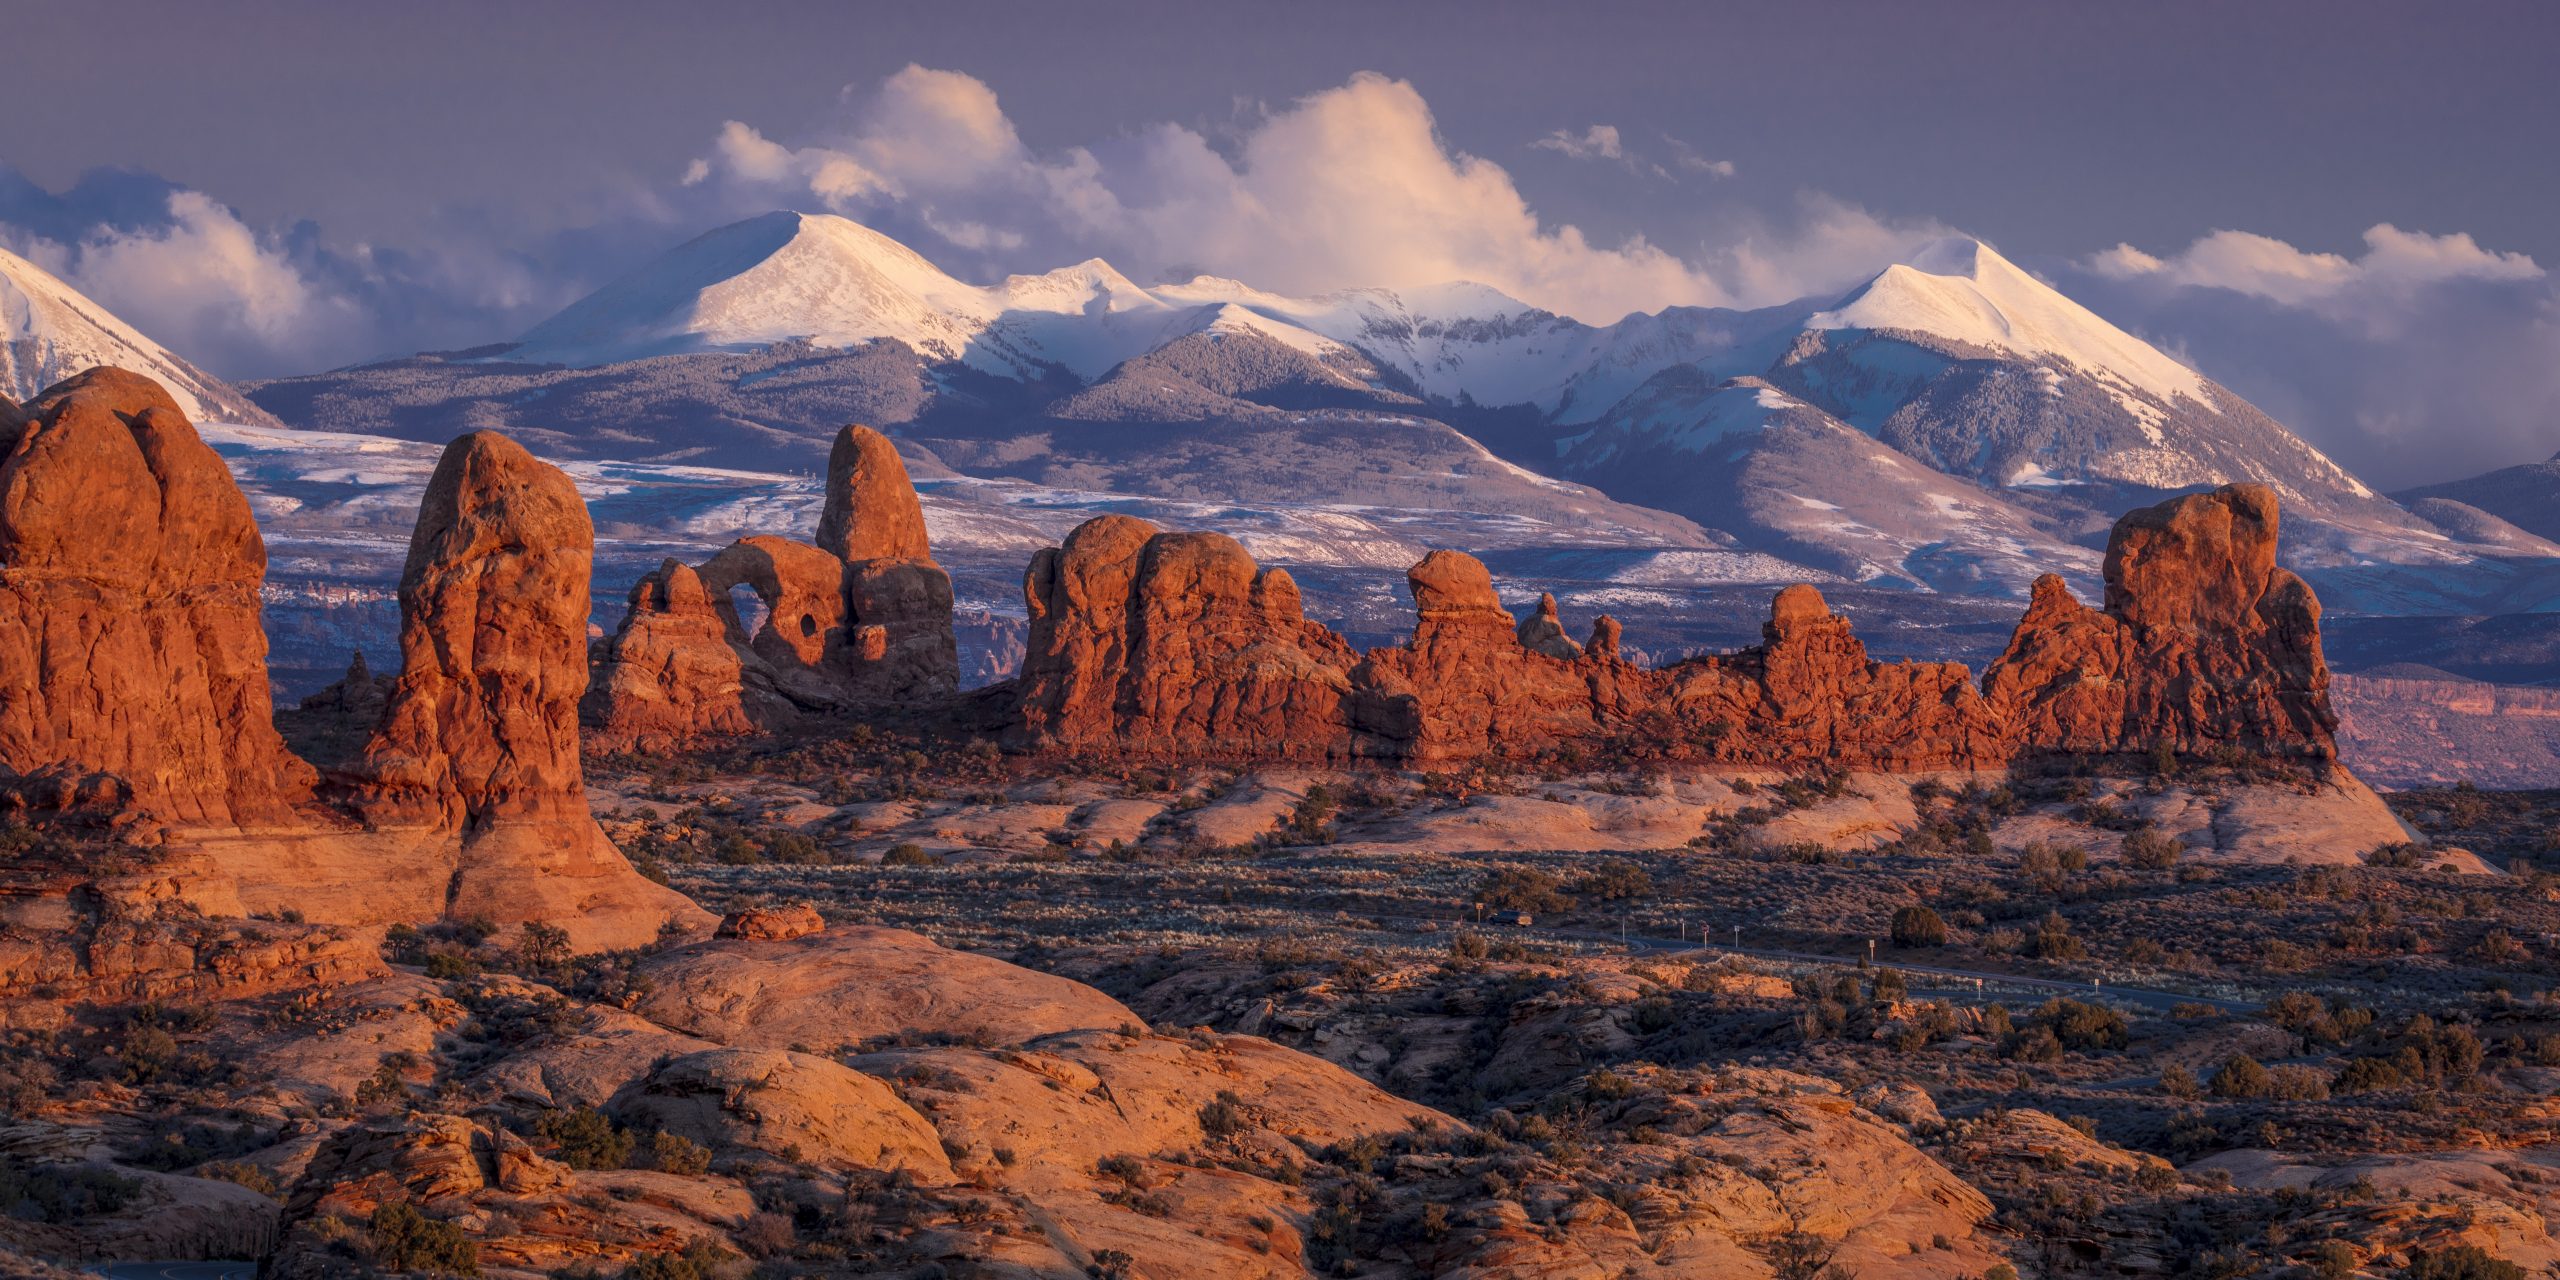 Arches National Park, Utah at sunset with La Salle mountains